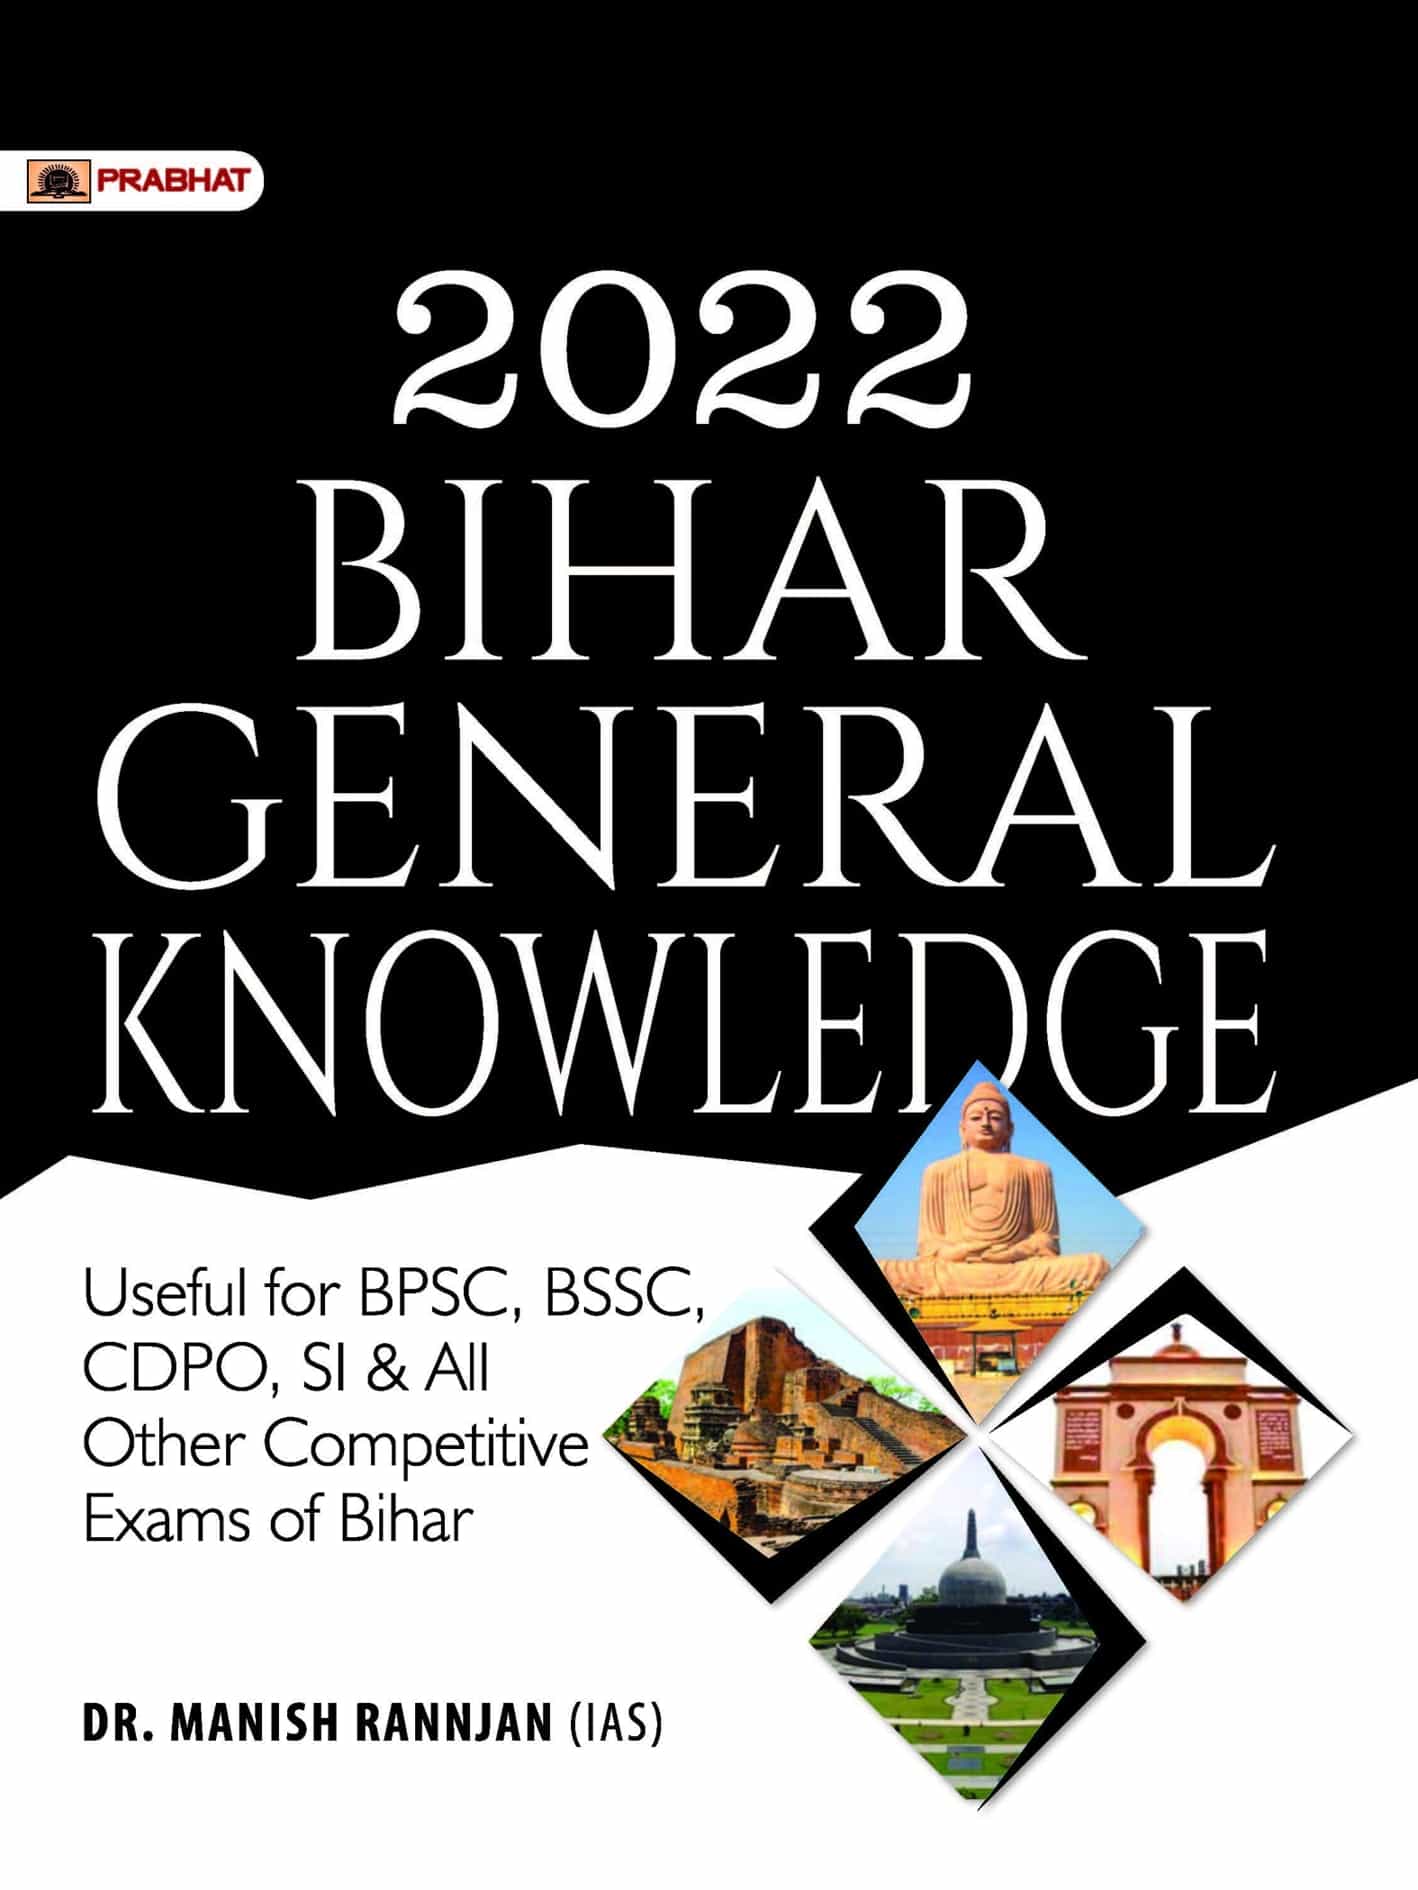 Bihar General Knowledge 2022 for BPSC & Other Competitive Exams